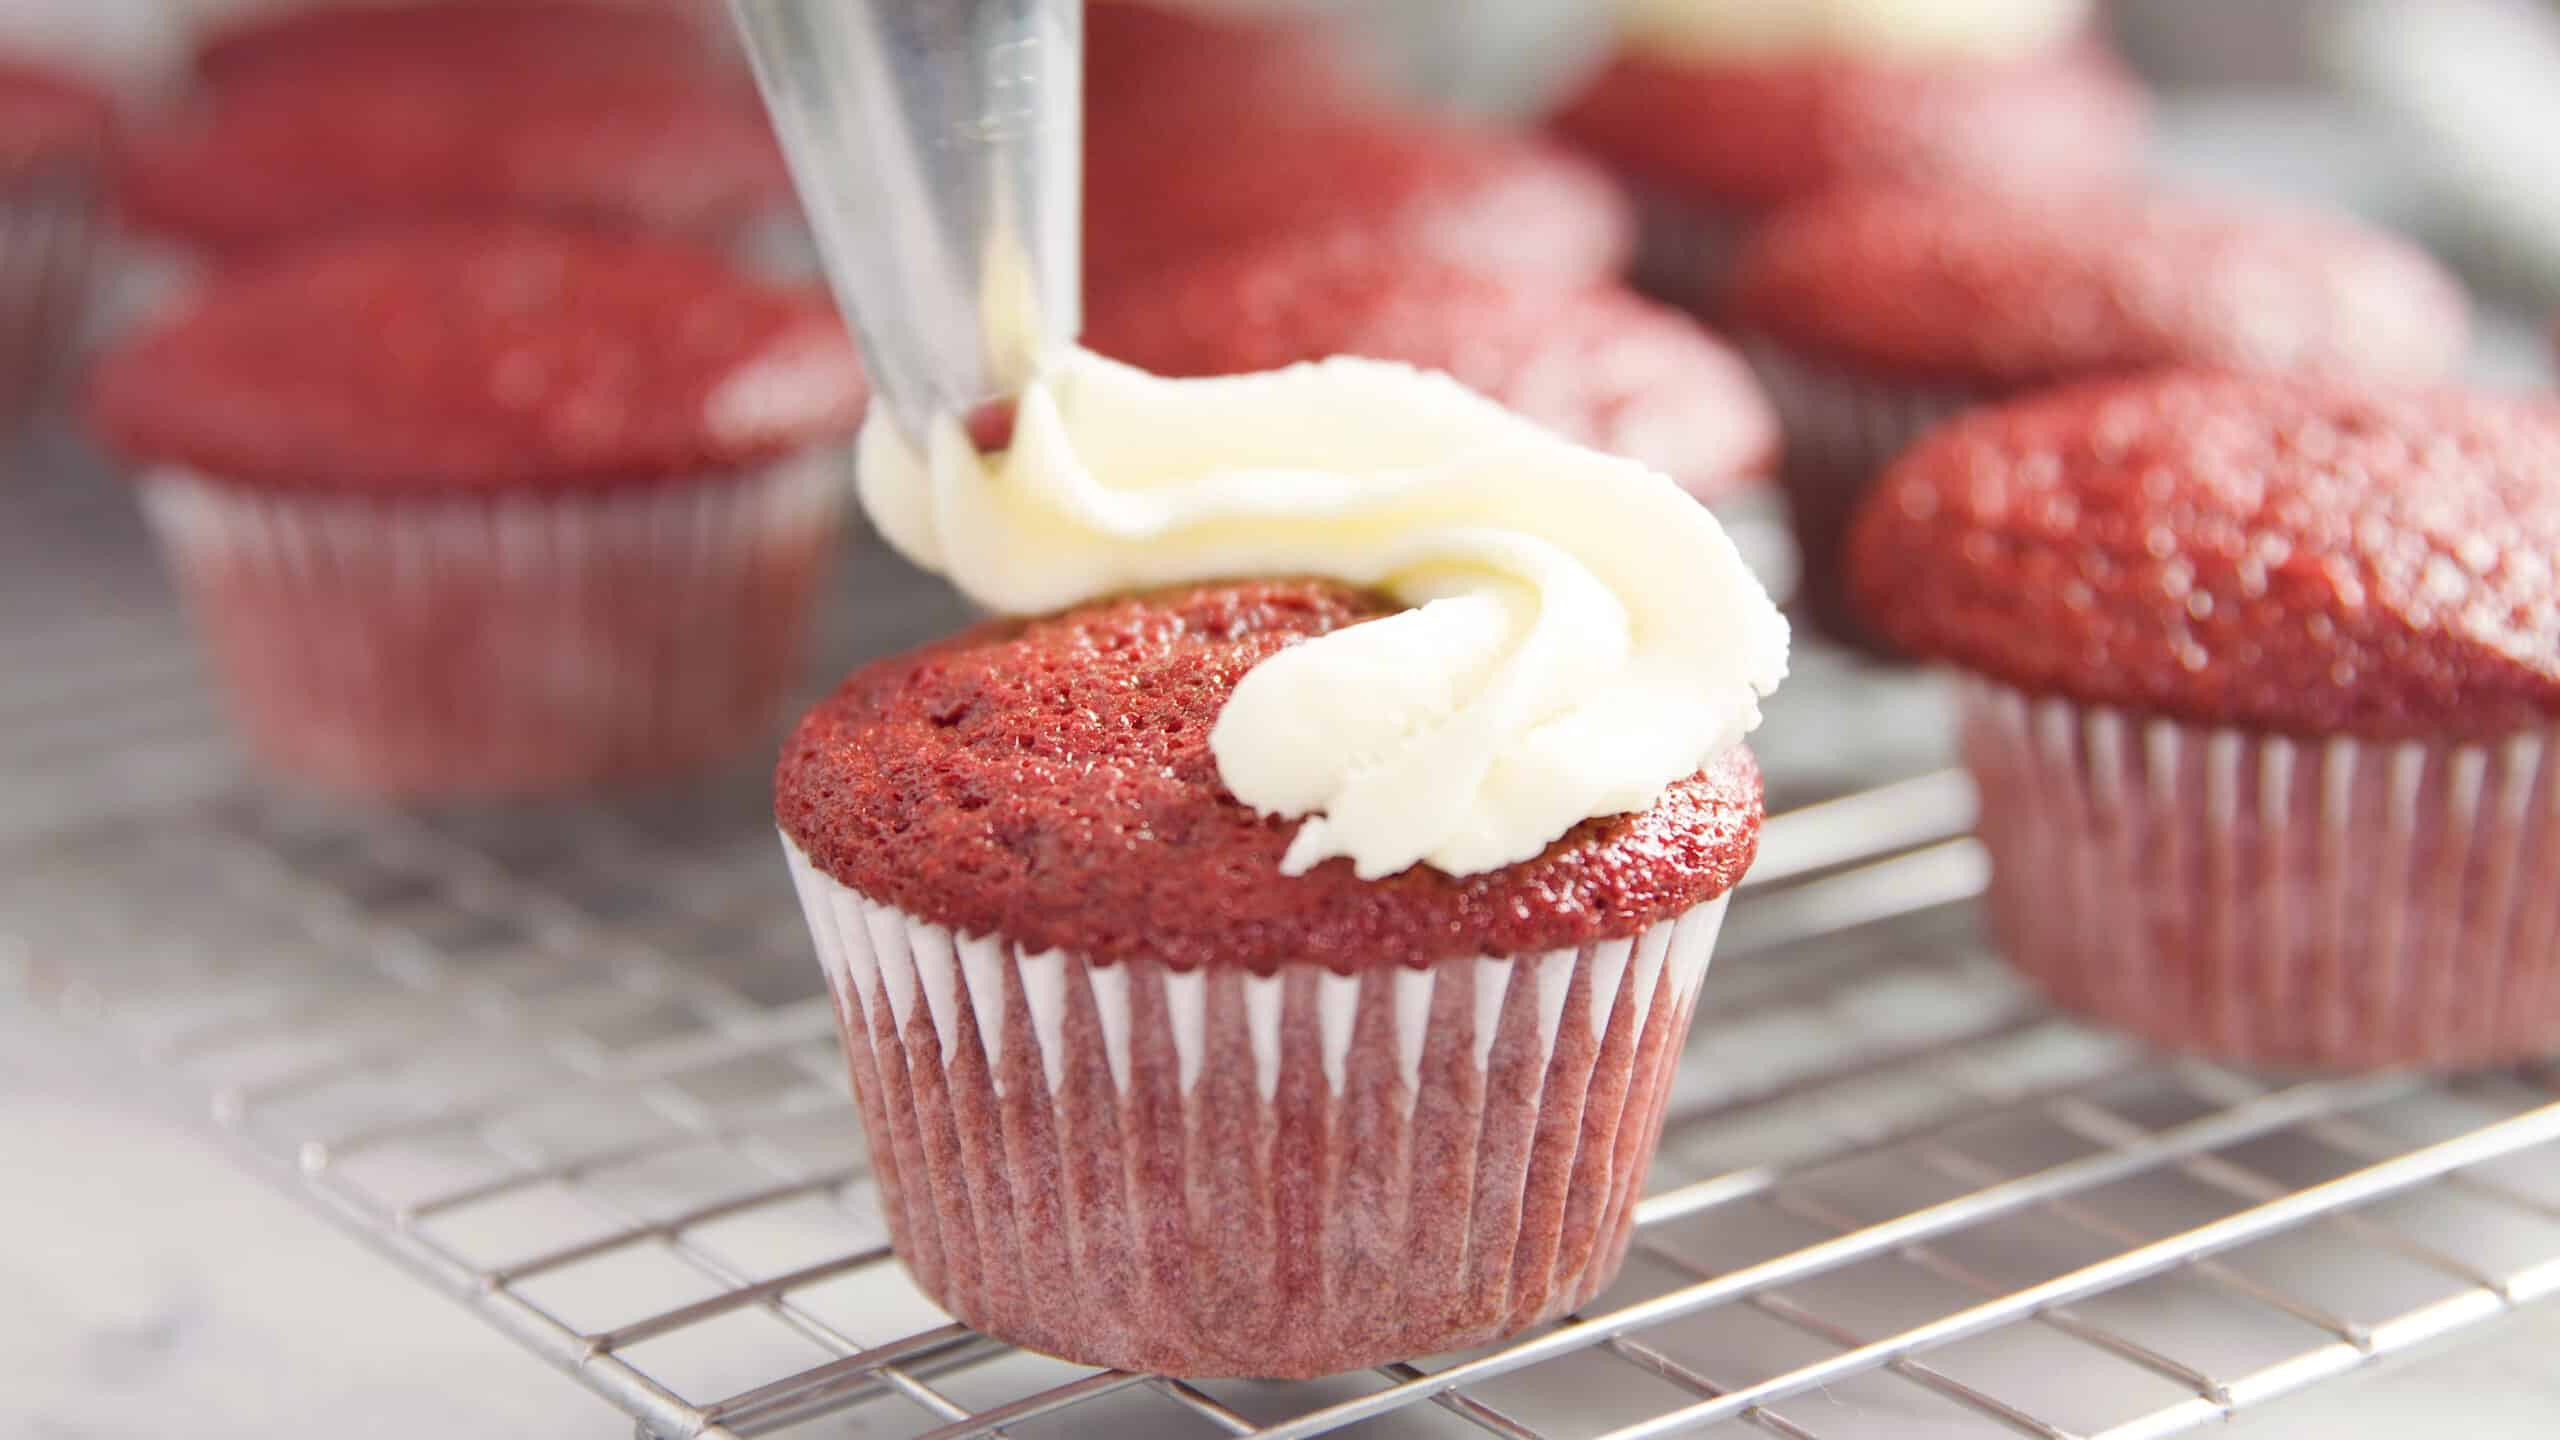 Close-up view of a single red velvet cupcake with paper liner and white creamy Ermine Icing being topped onto the cupcake with a piping bag.